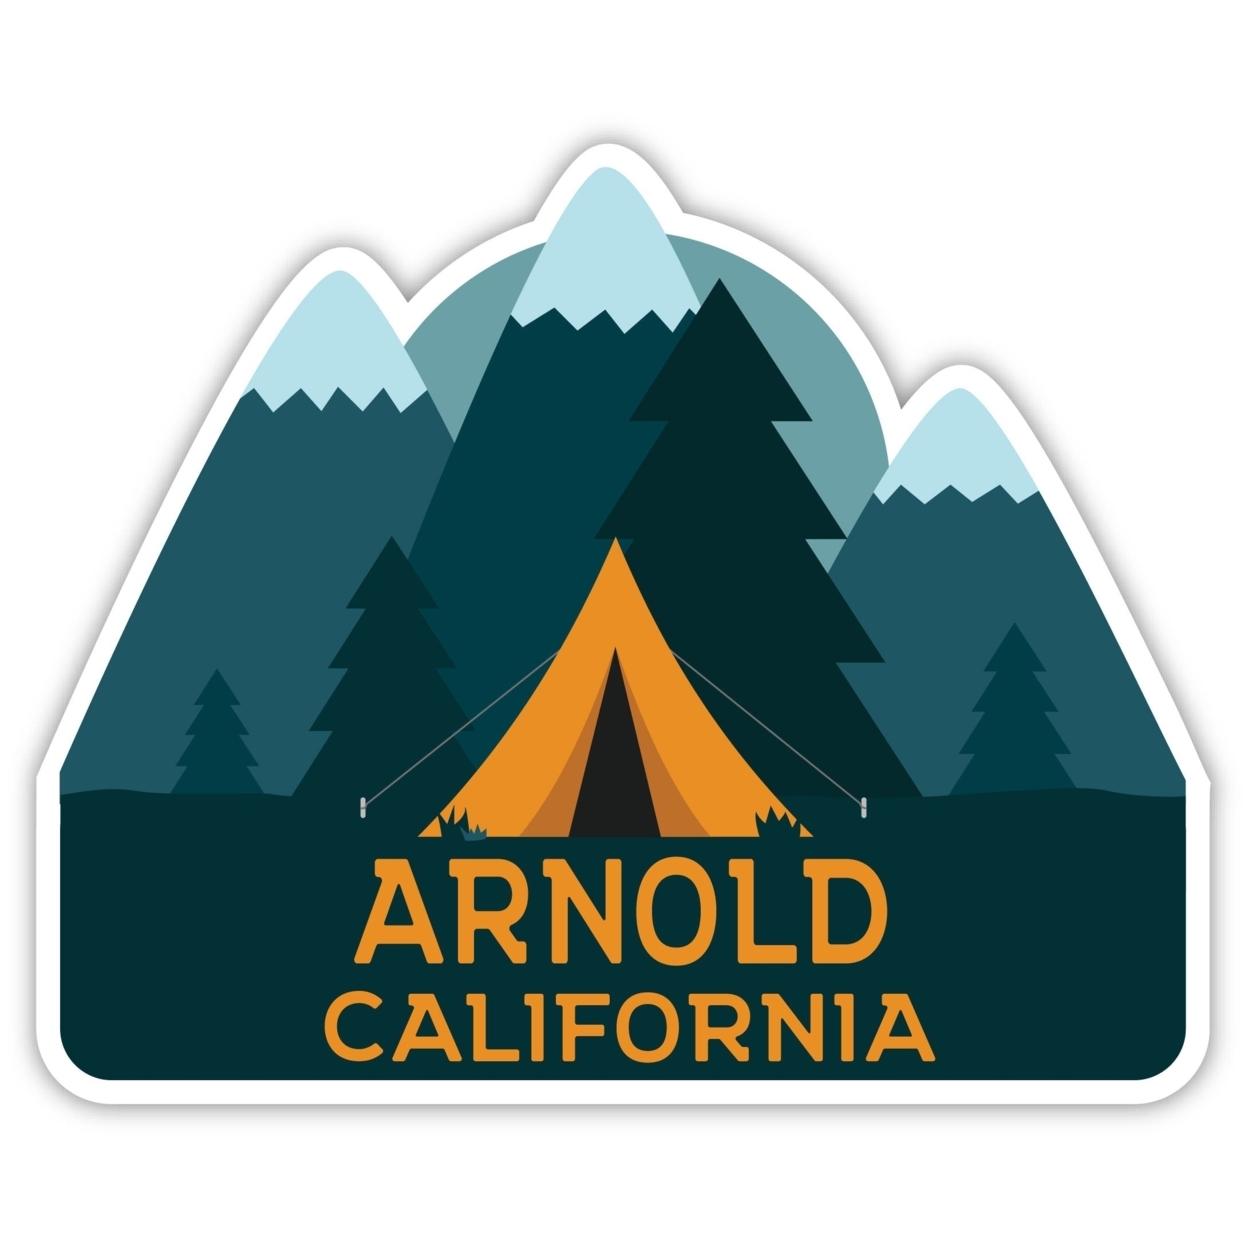 Arnold California Souvenir Decorative Stickers (Choose Theme And Size) - 4-Pack, 4-Inch, Tent